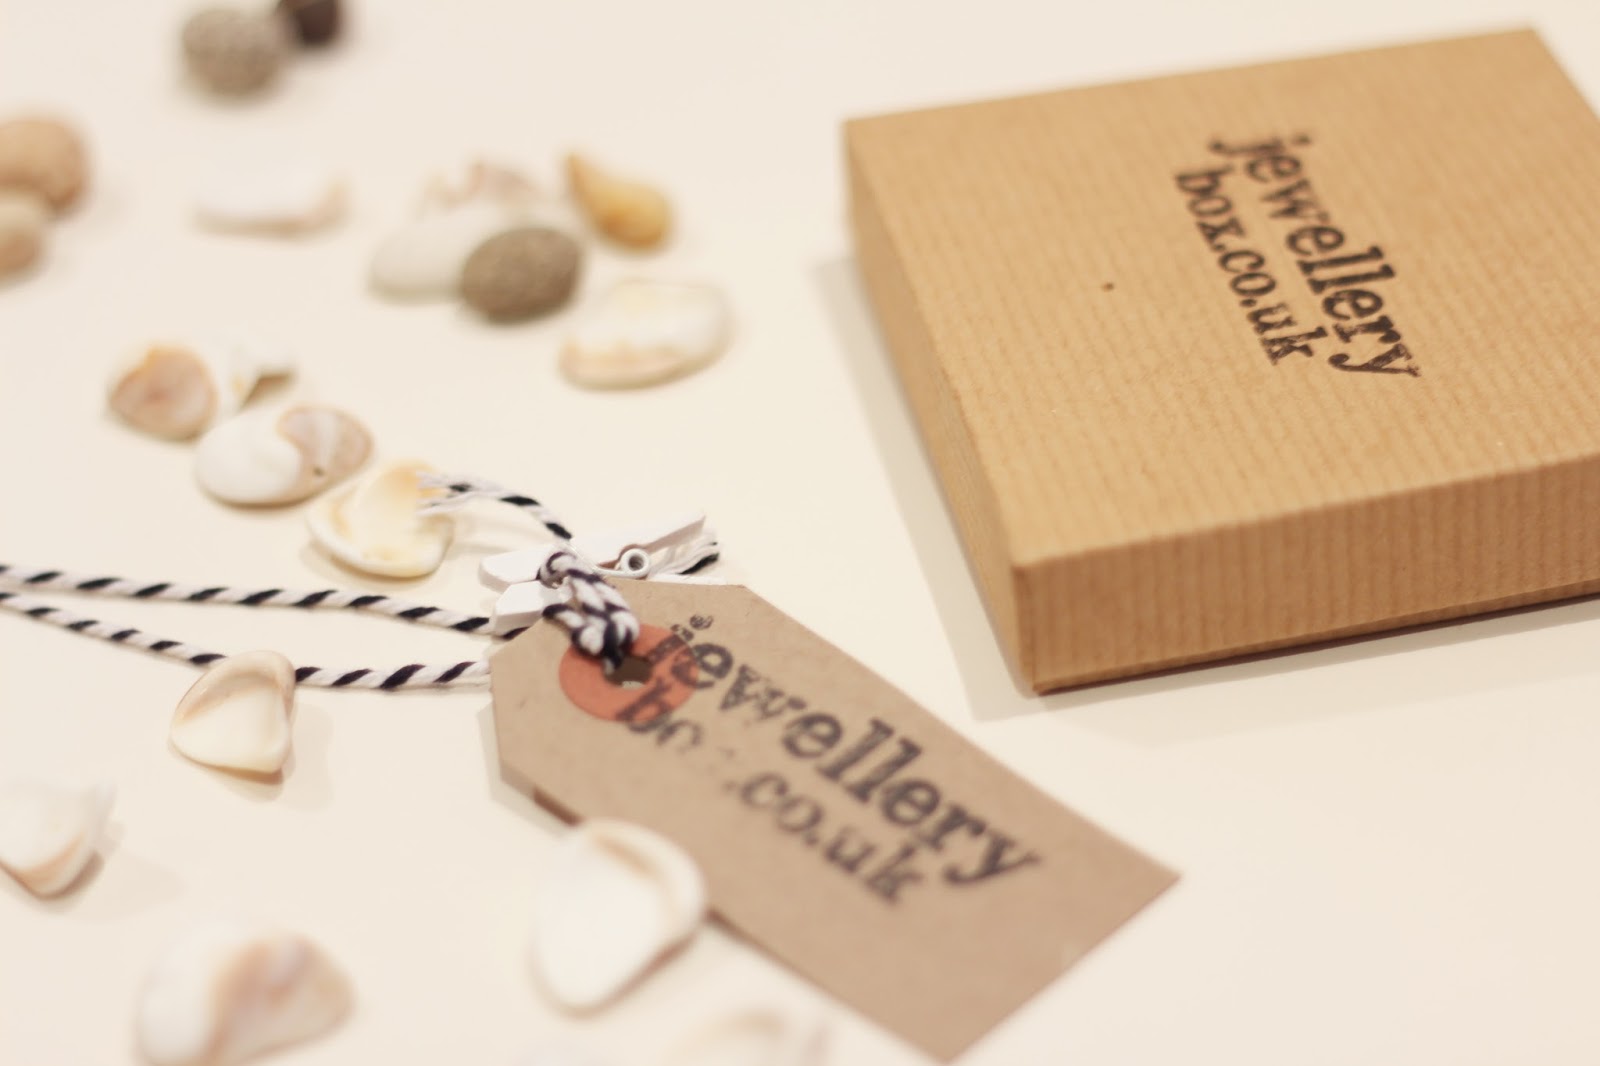 looking for dainty jewellery and stuck for options? little miss fii has the perfect solution for you